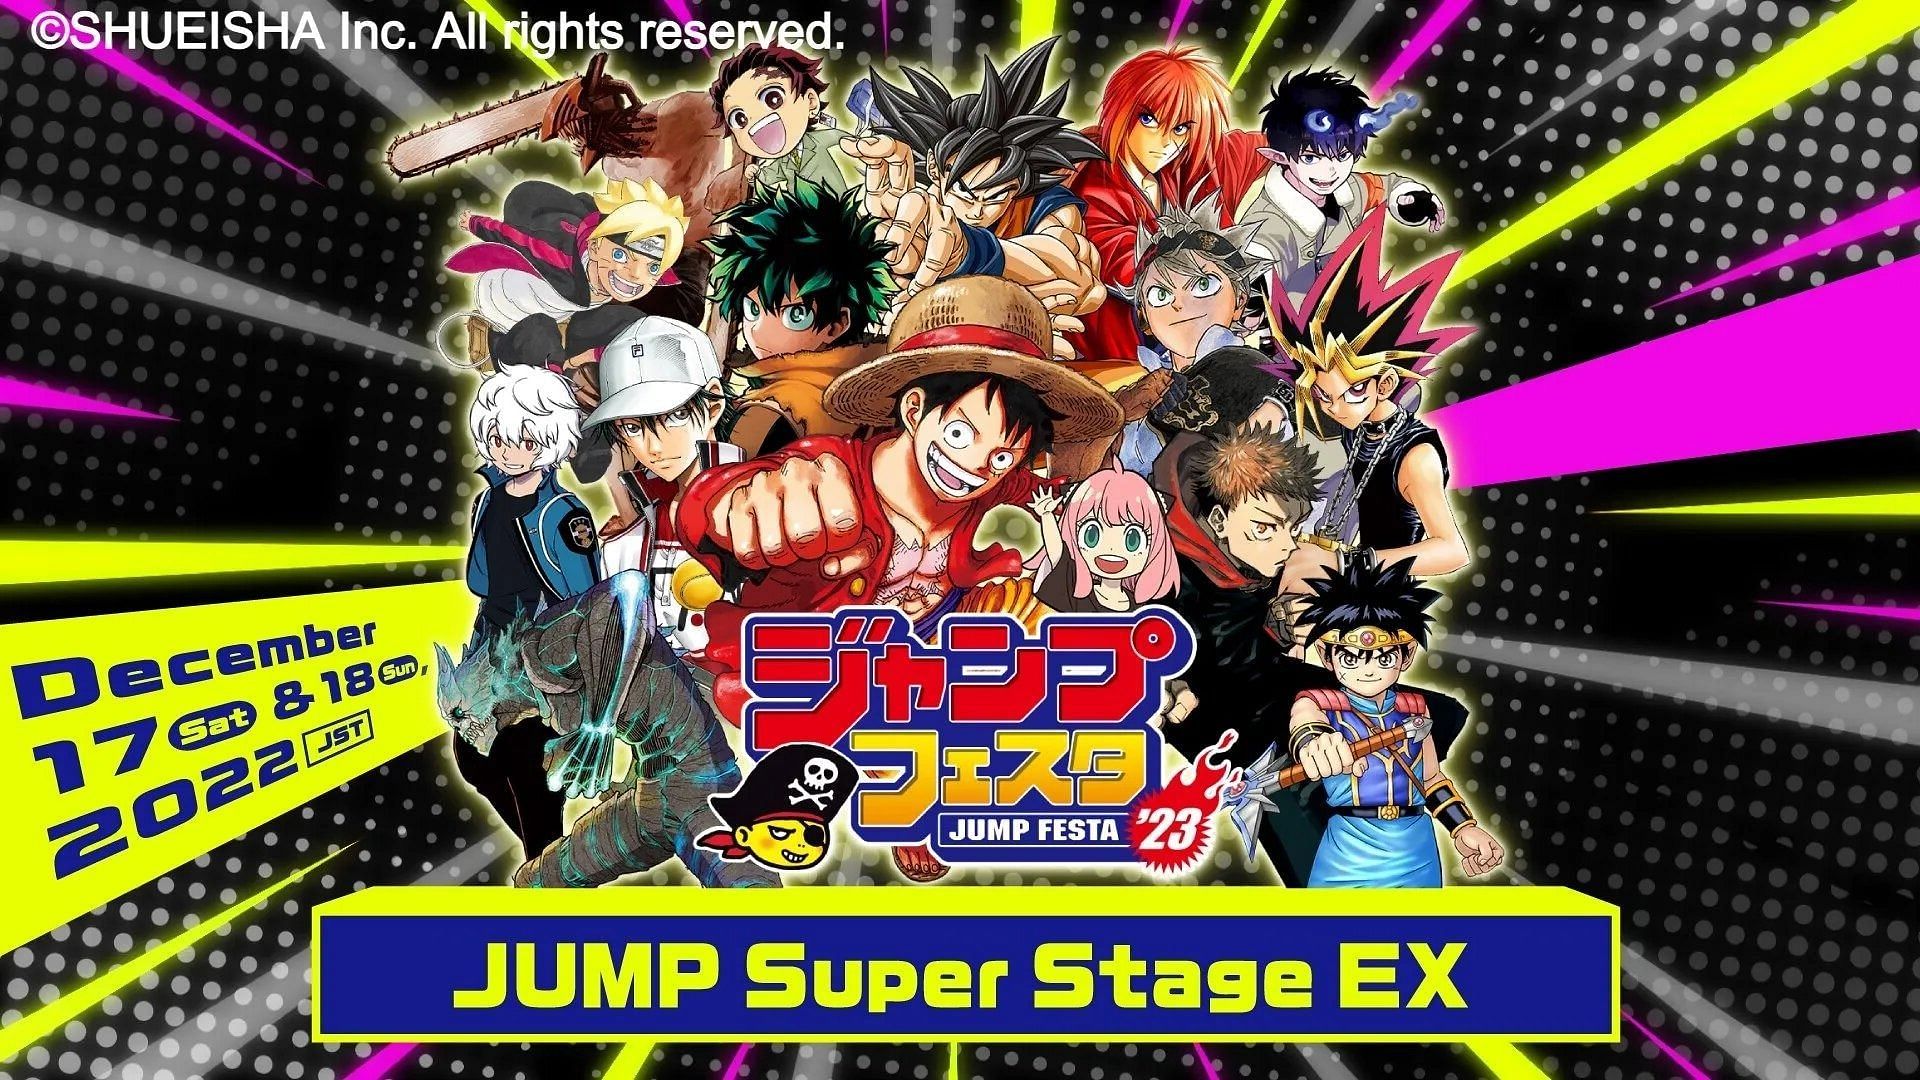 Demon Slayer Super Stage at Jump Festa 2023: Timing, streaming details,  what to expect, and more